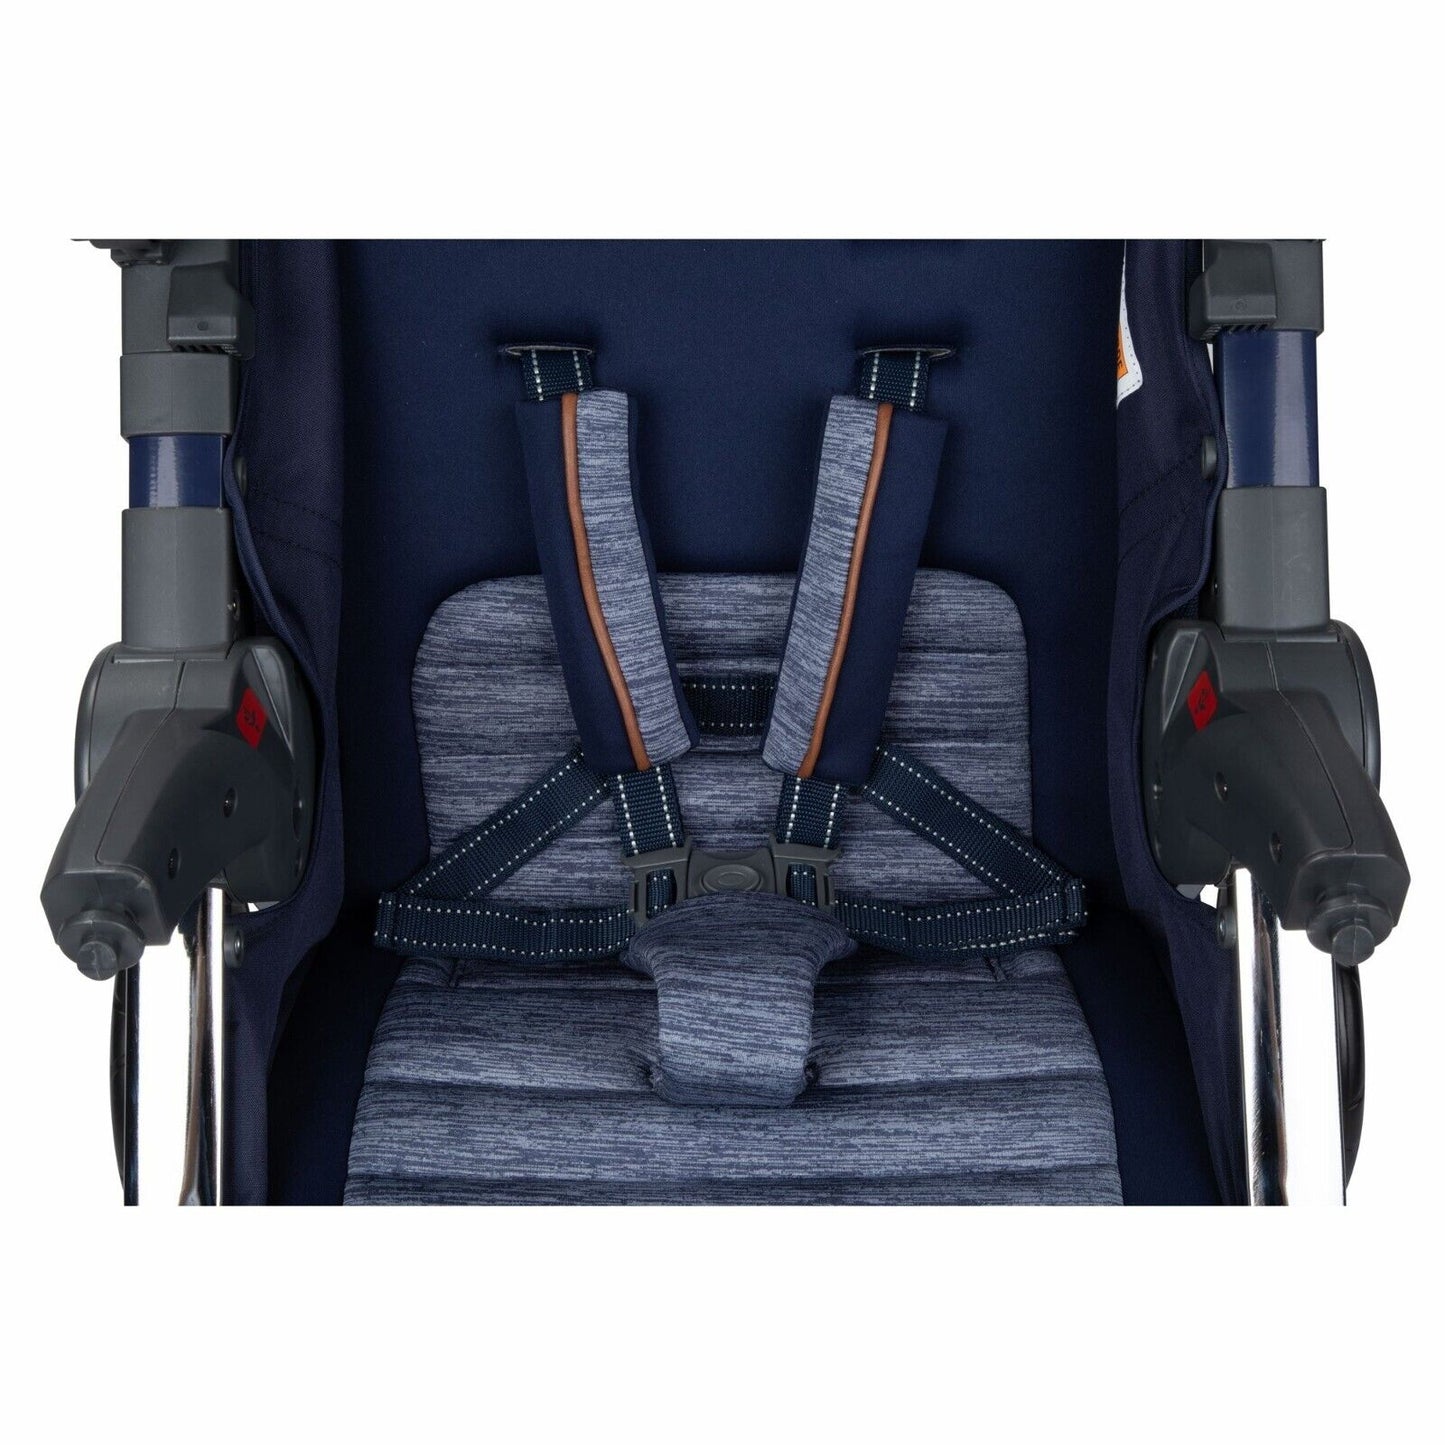 Baby Strollers Travel System with Car Seat Newborn Infant Playard Nursery Combo